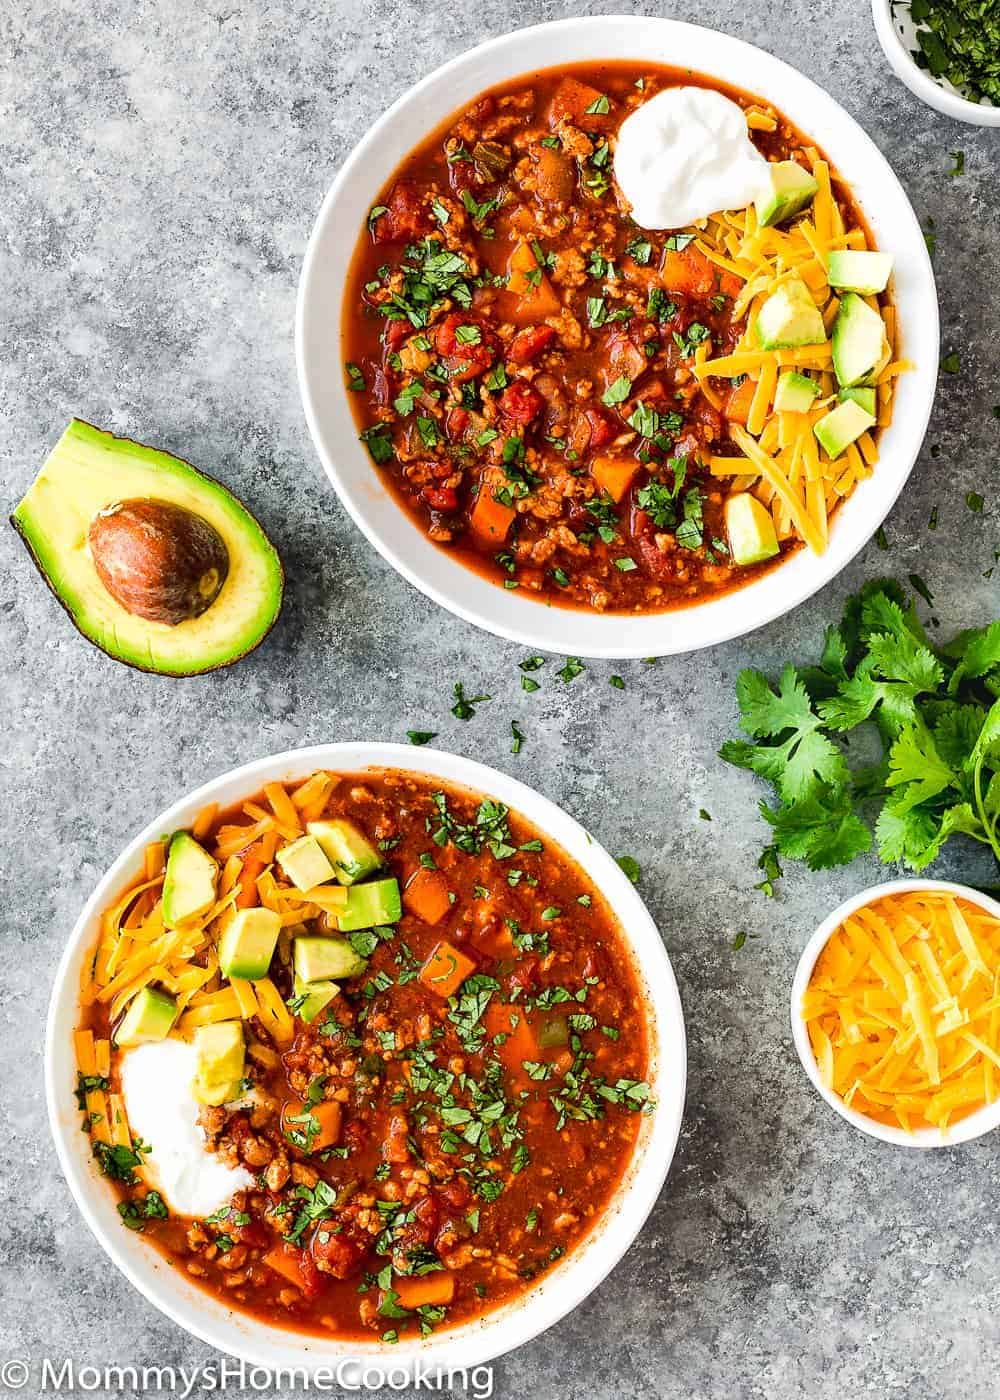 Healthy Low Carb Turkey Chili Video Mommy S Home Cooking